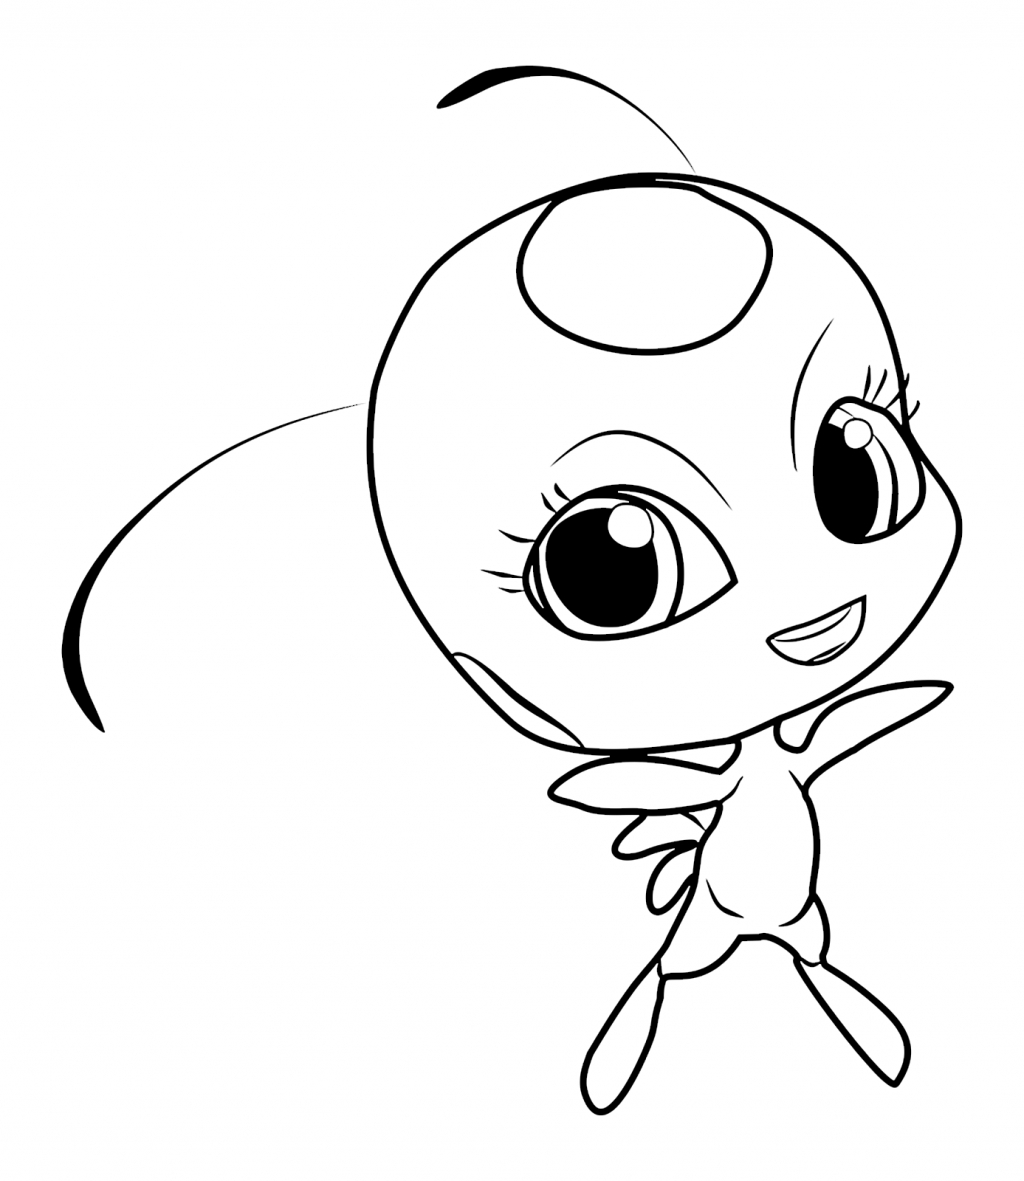 Miraculous Ladybug Coloring Pages Coloring Pages Miraculous Ladybug